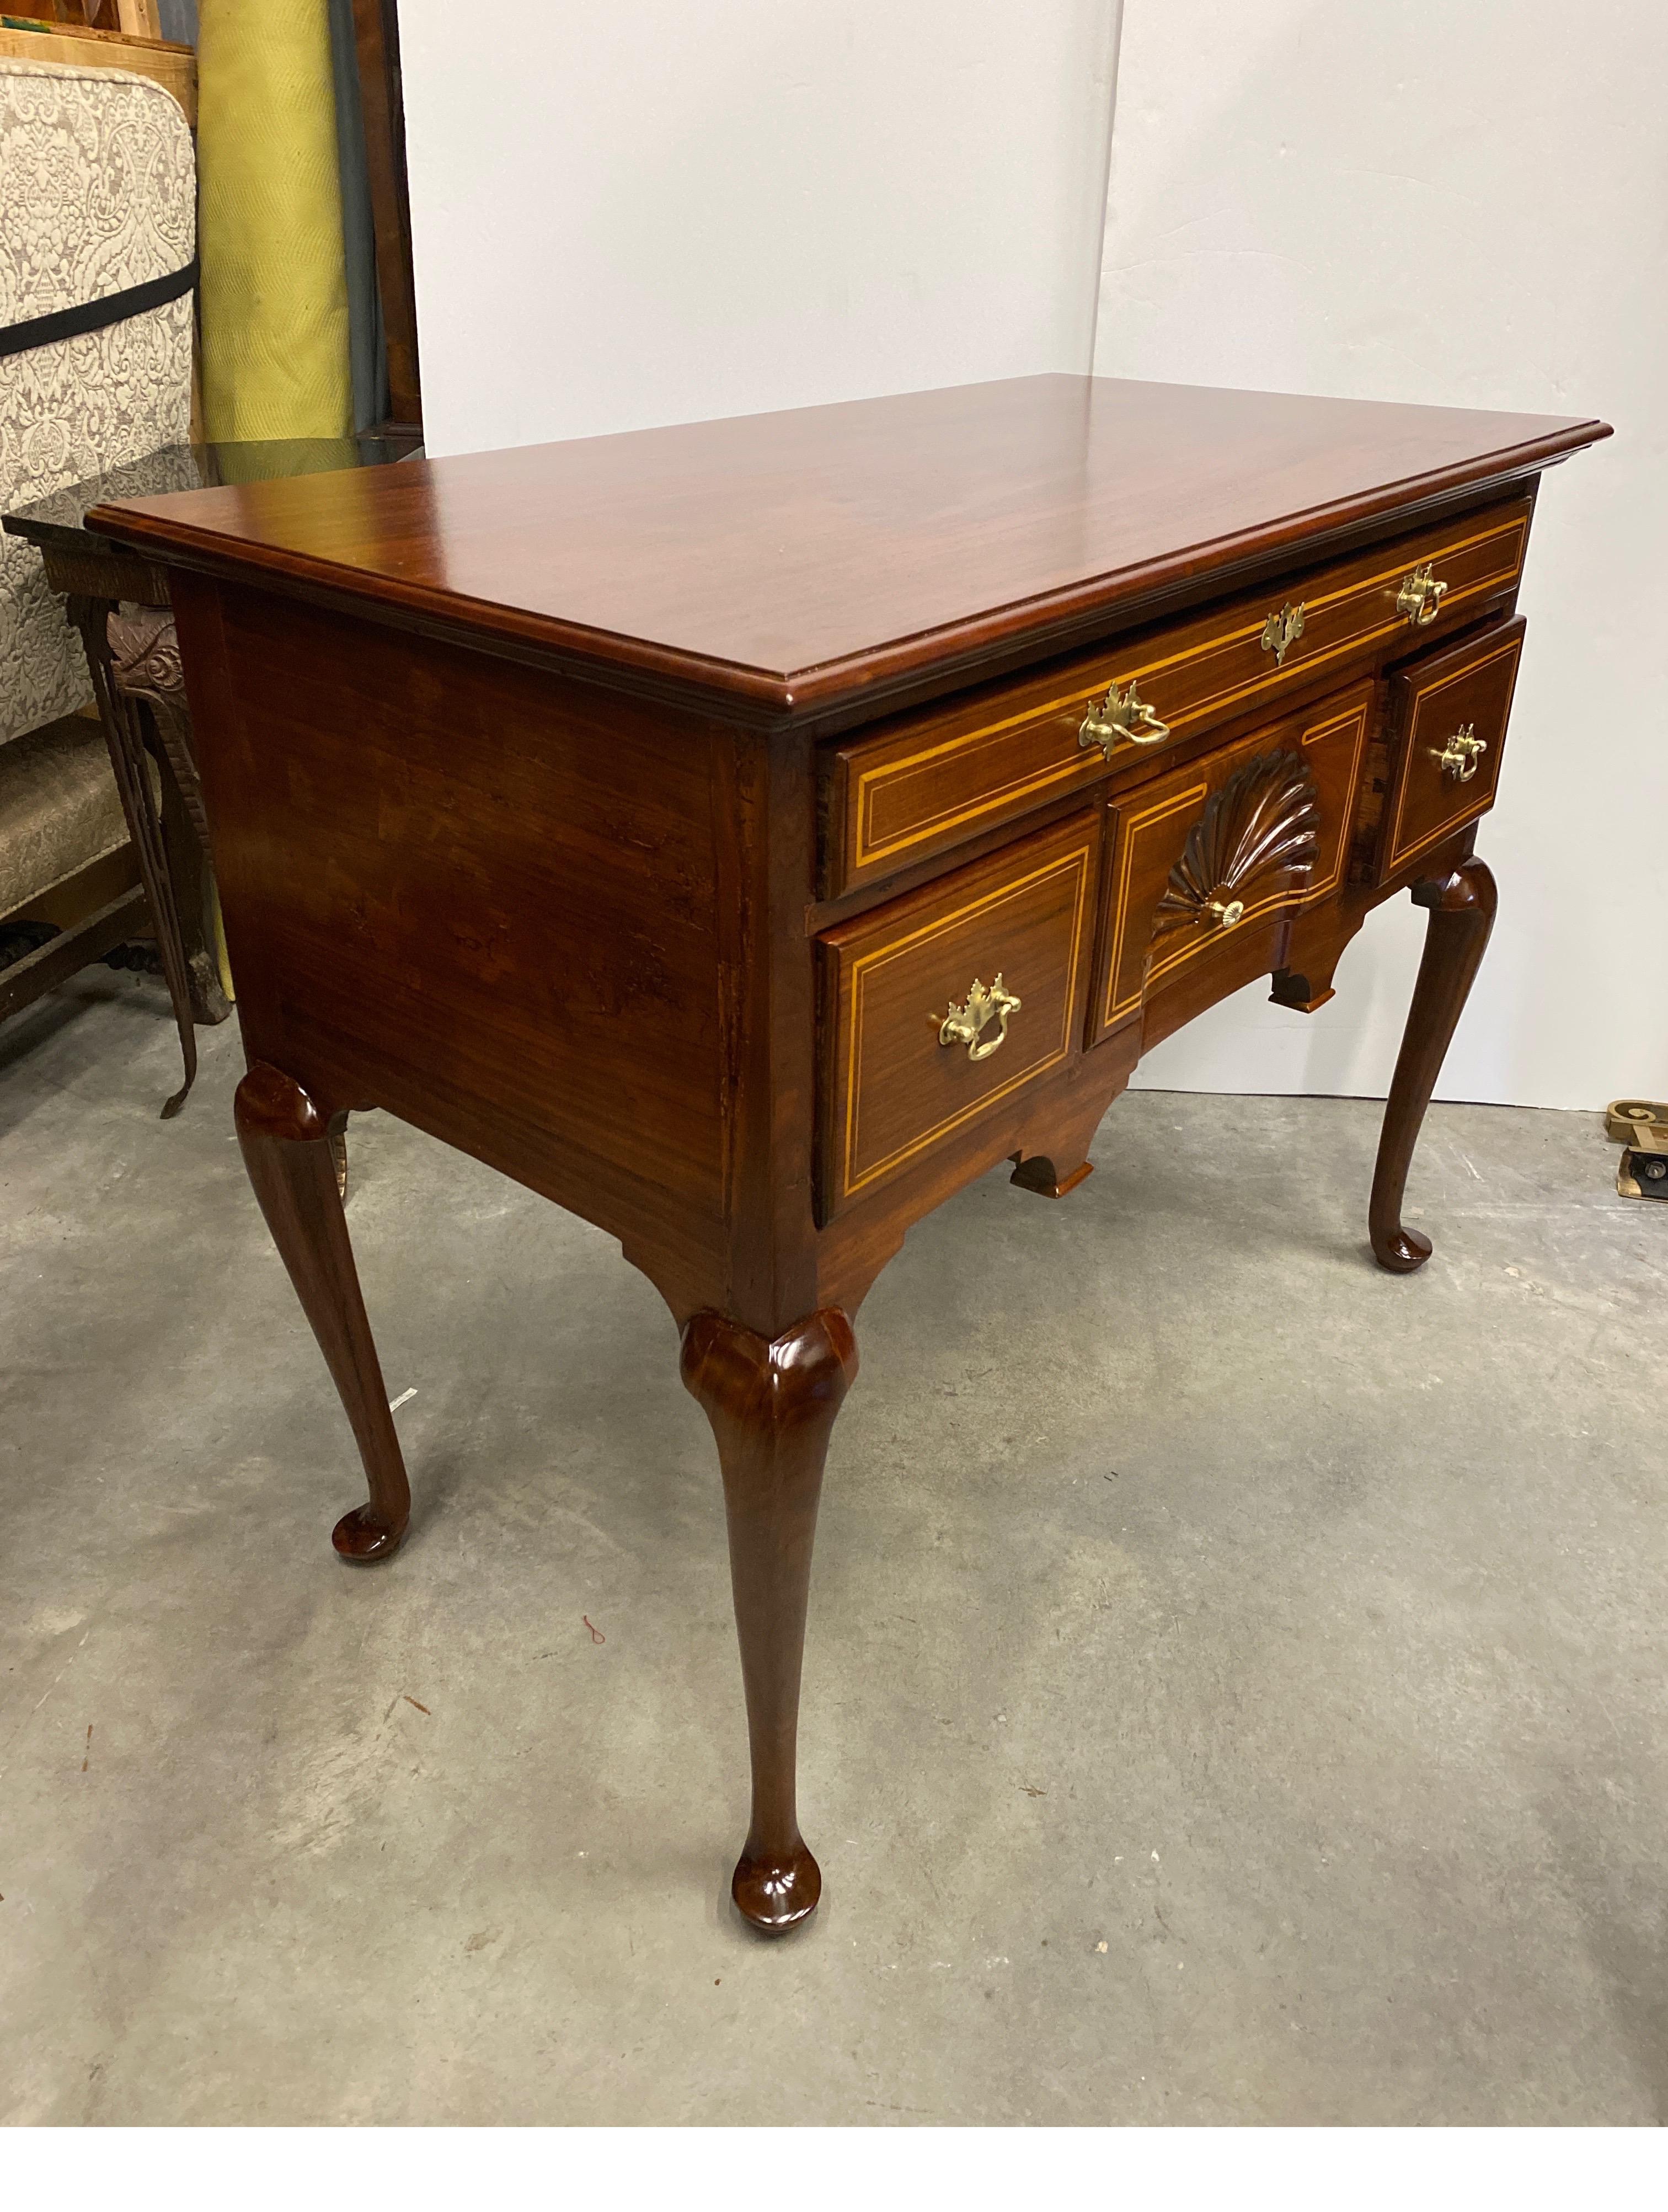 Early 19th Century Solid Cherry Inlaid Lowboy, Circa 1800 For Sale 9